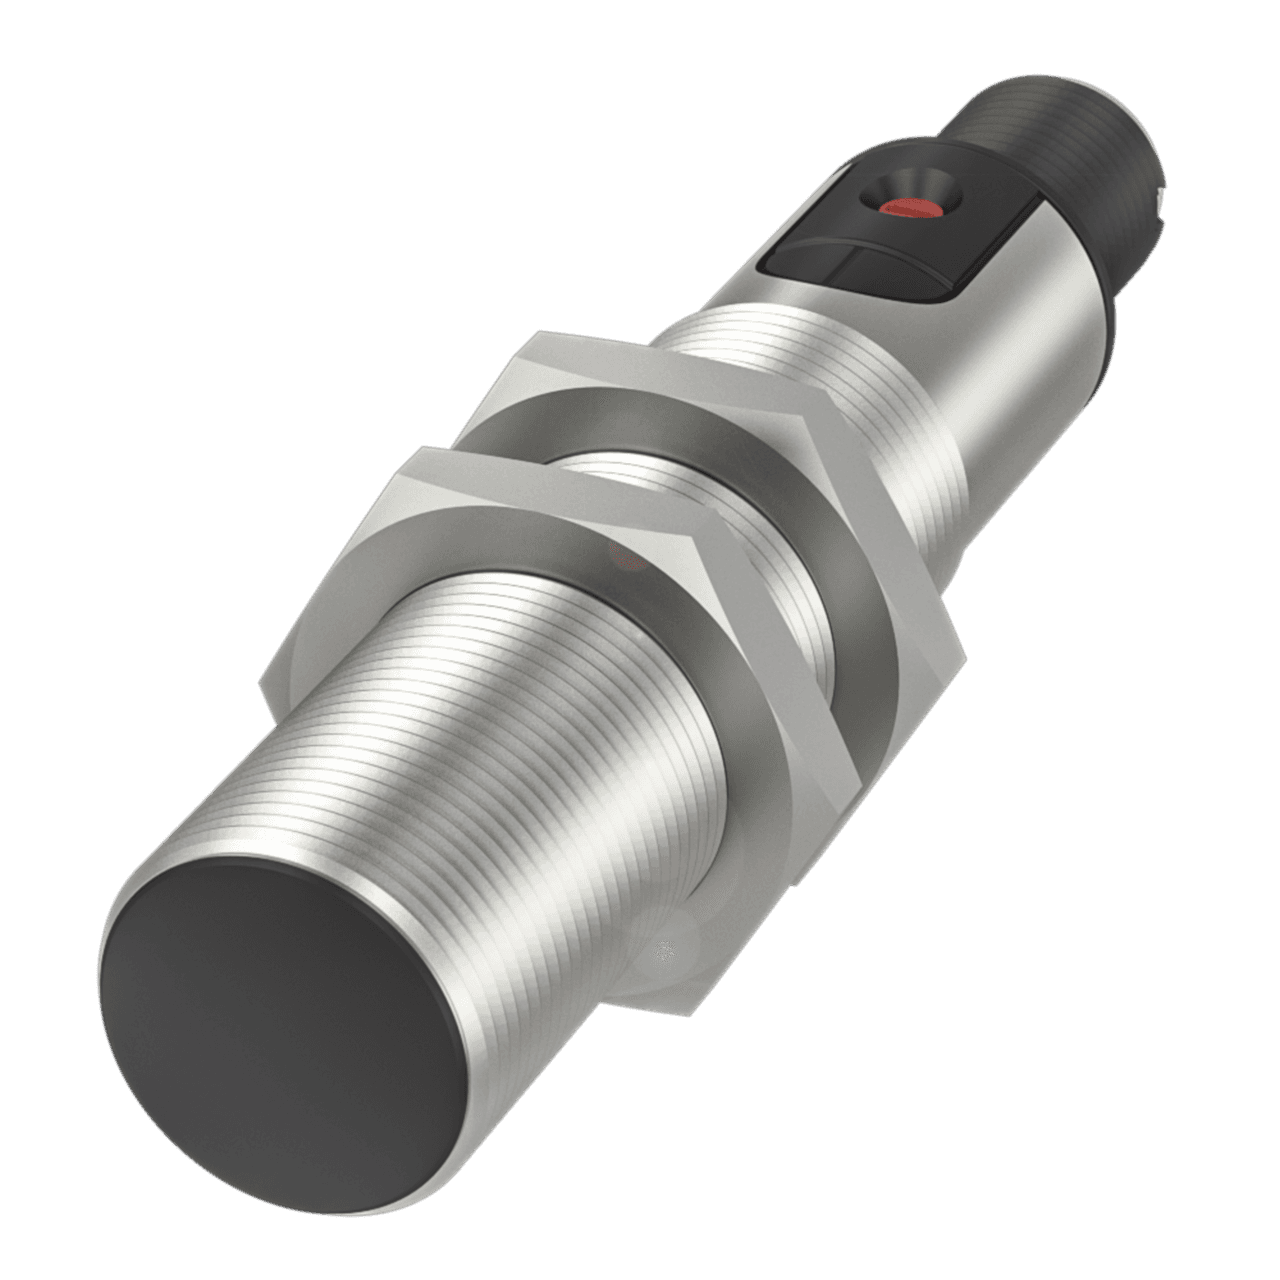 Balluff BCS00MF Capacitive sensors for object detection, Dimension: Ø 18 x 88.5 mm, Series: M18, Thread (A): M18x1, Installation: for flush mounting, Connection: Connector, M12x1-Male, 3-pin, Switching output: PNP Normally open (NO), Switching frequency: 100 Hz